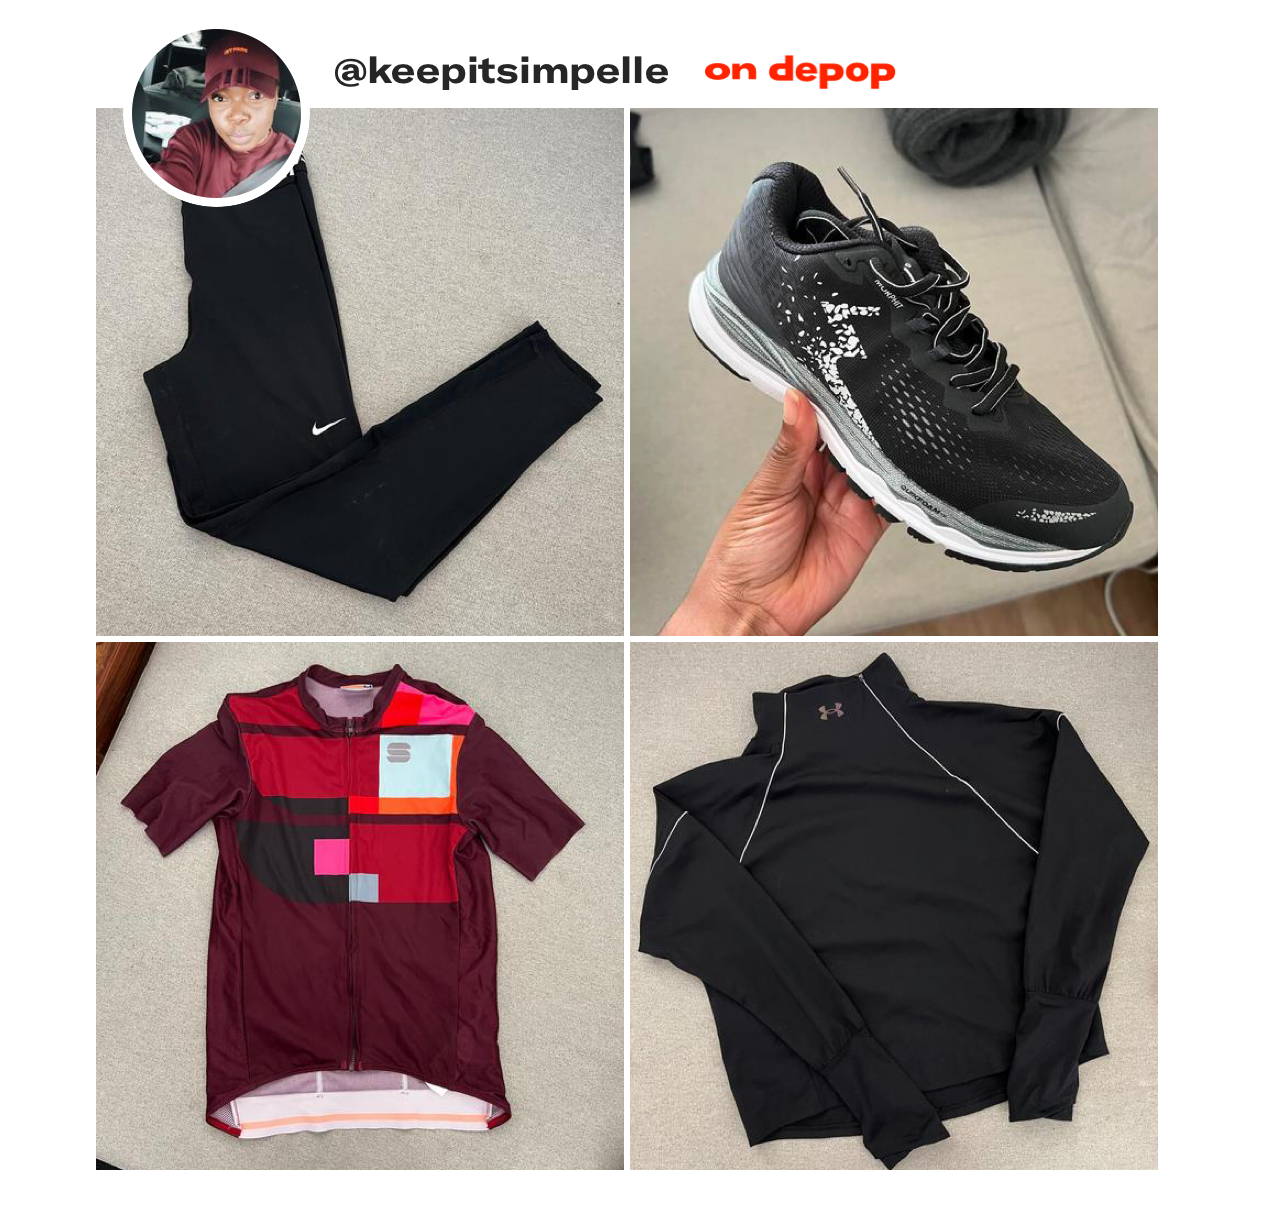 my shop - keep it simple - on depop selling cycling kit, sportswear, trainers and more fit kit. 